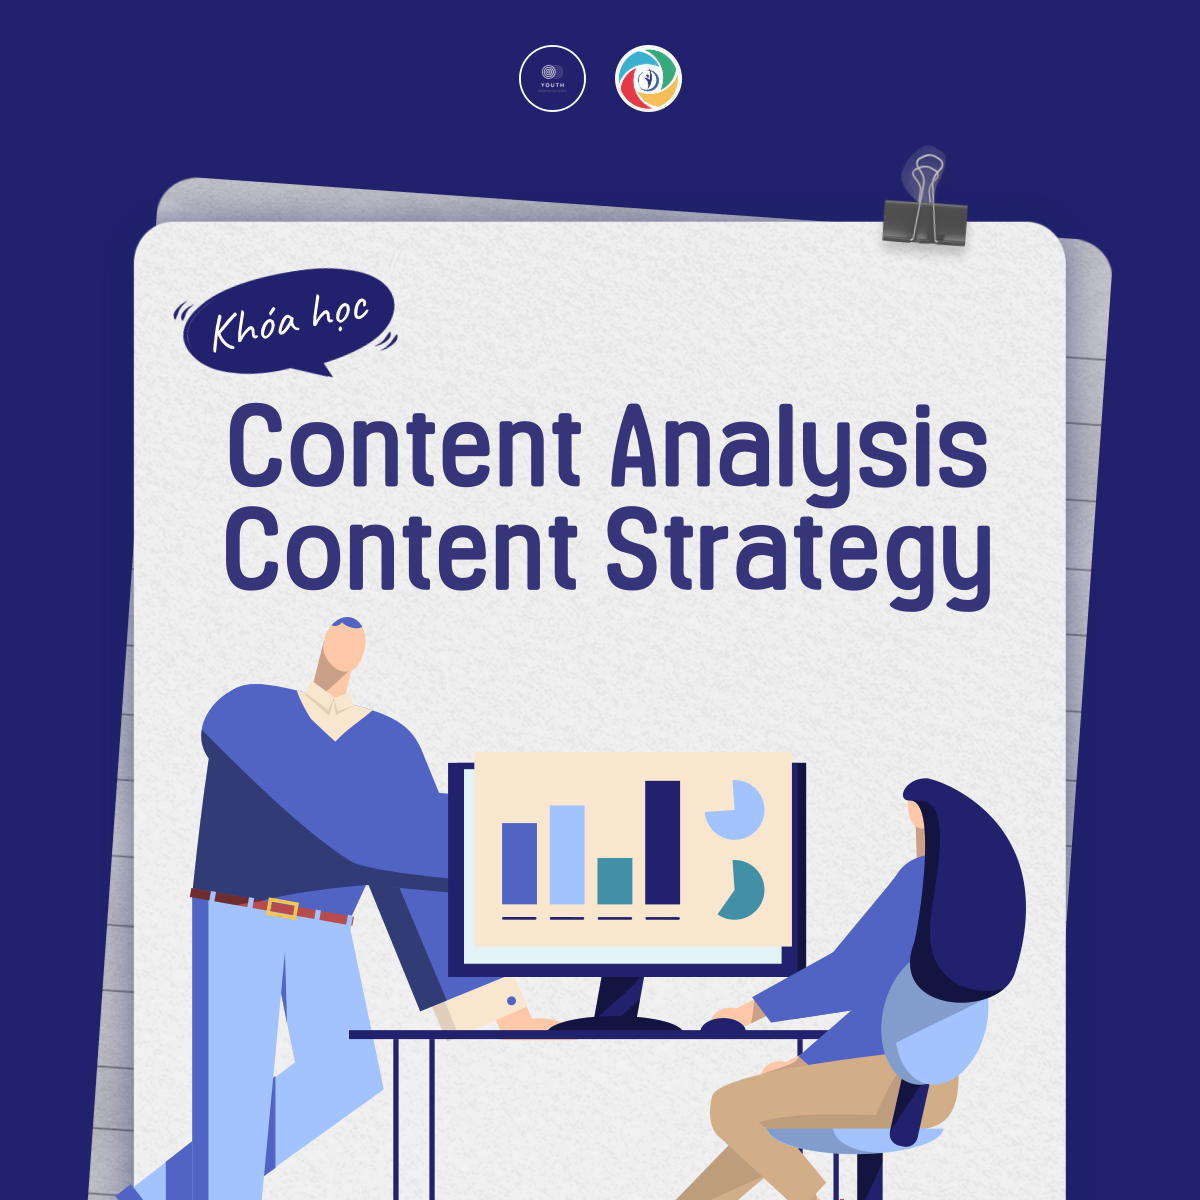 KHÓA HỌC Content Analysis and Content Strategy từ Udemy